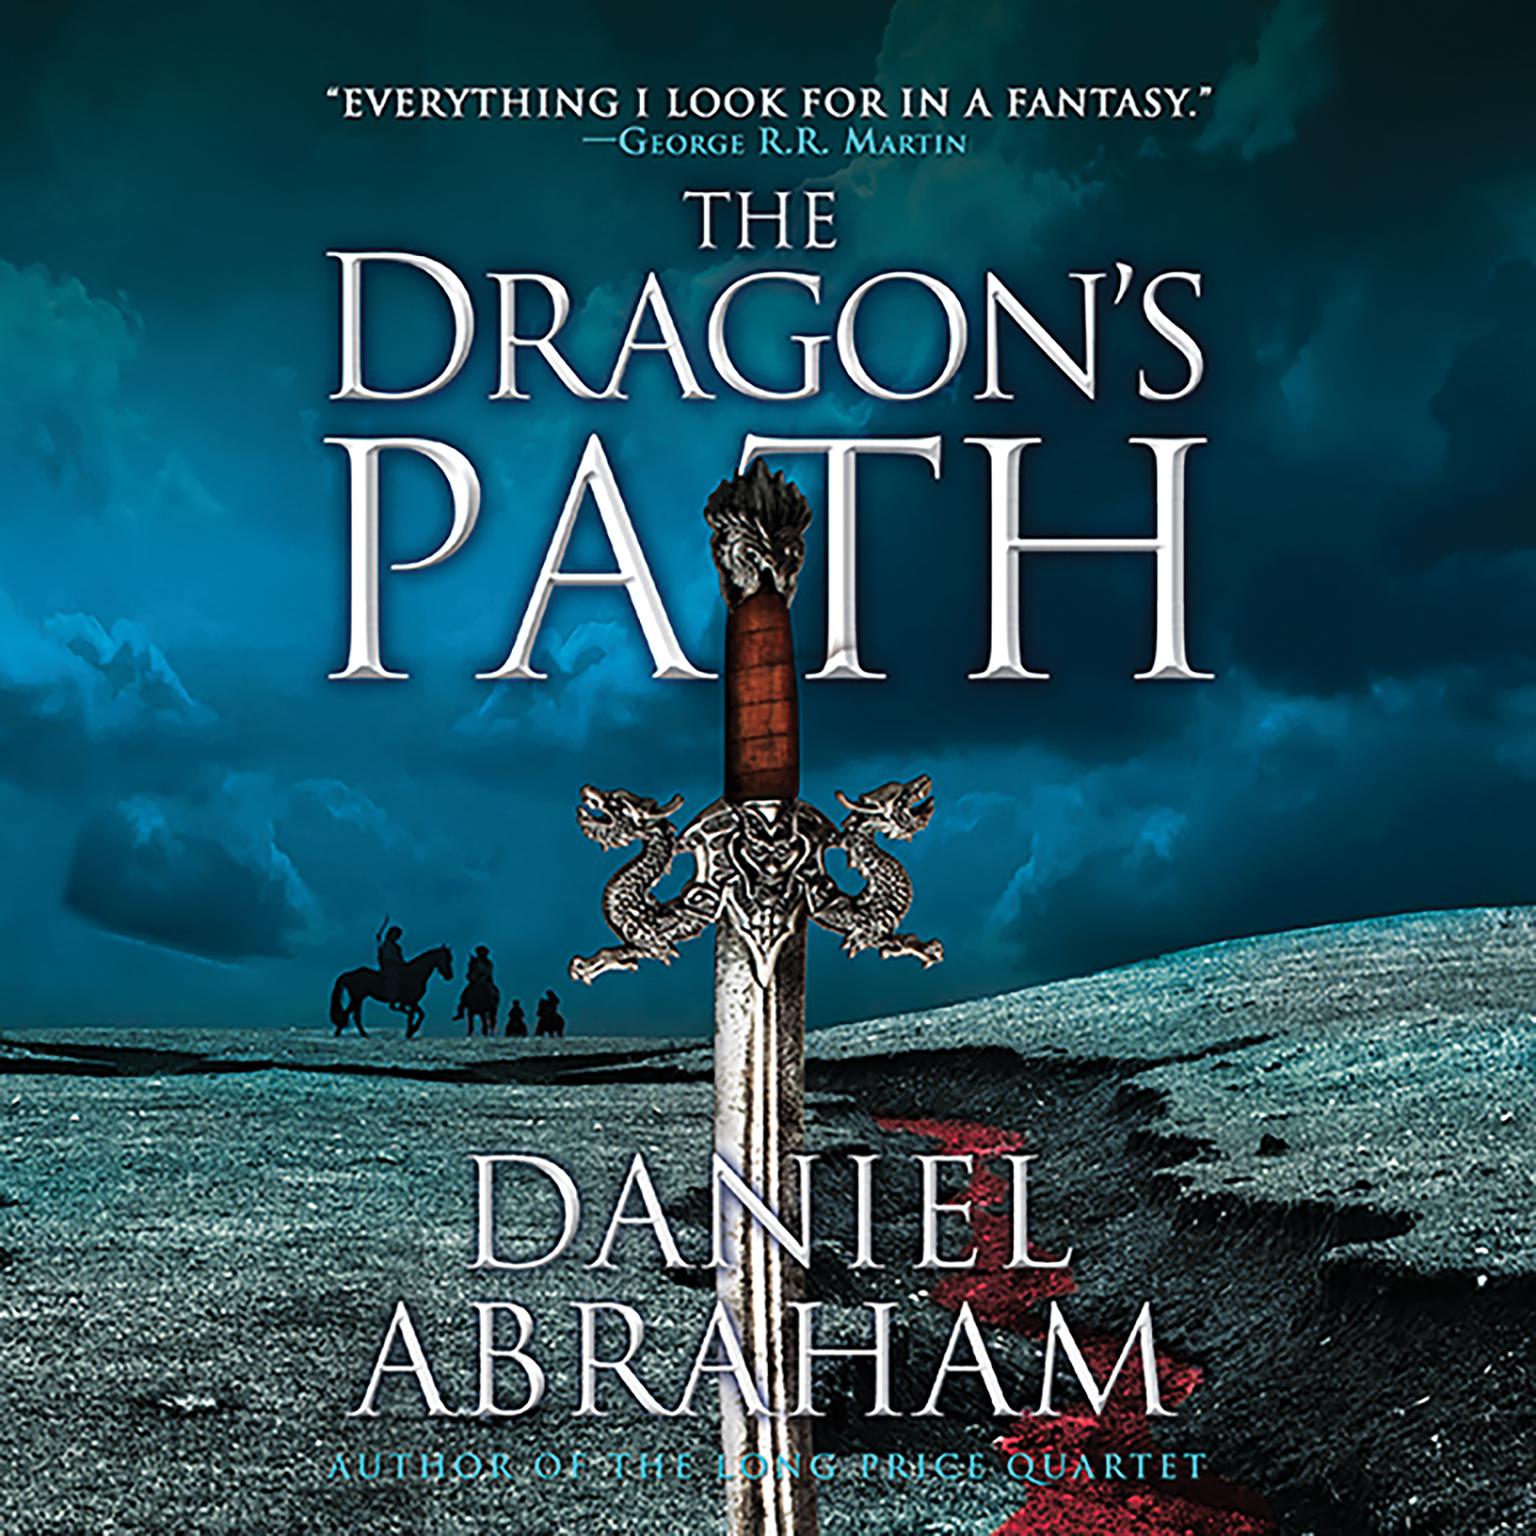 The Dragons Path Audiobook, by Daniel Abraham